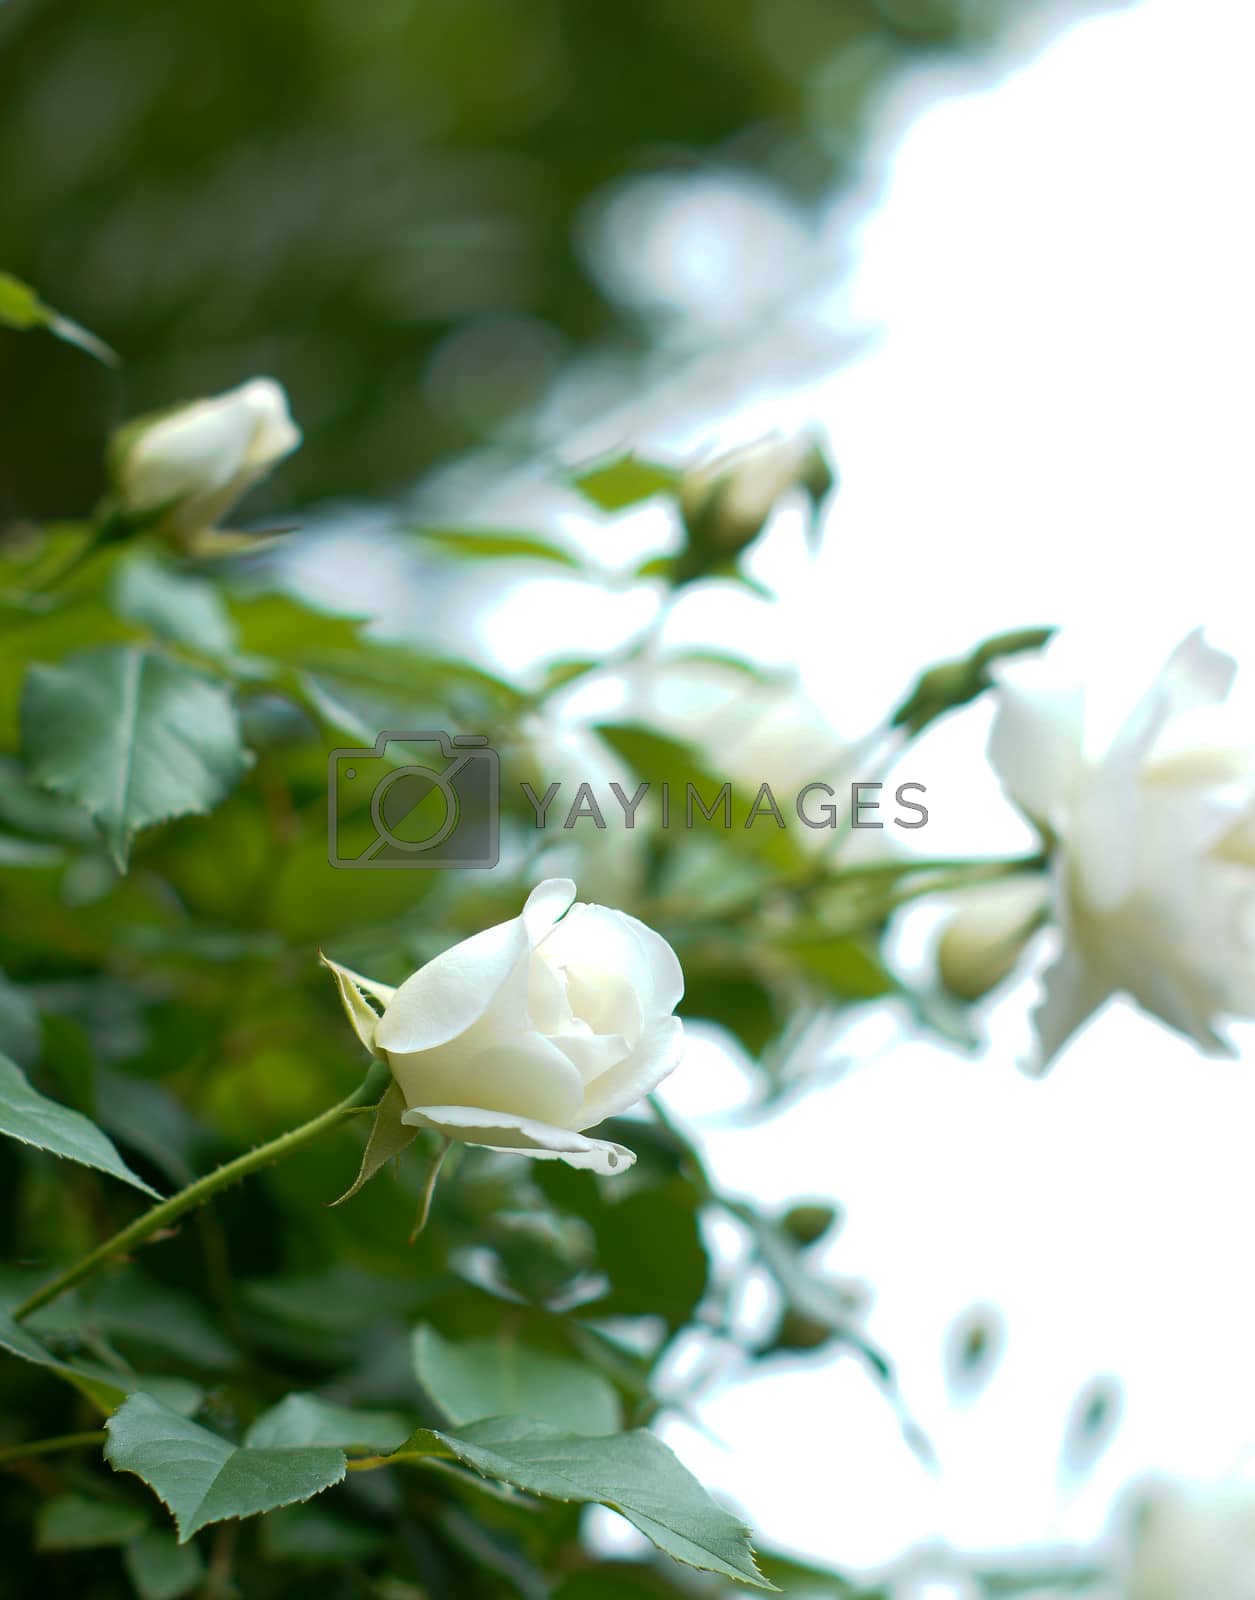 Royalty free image of White roses by Elet